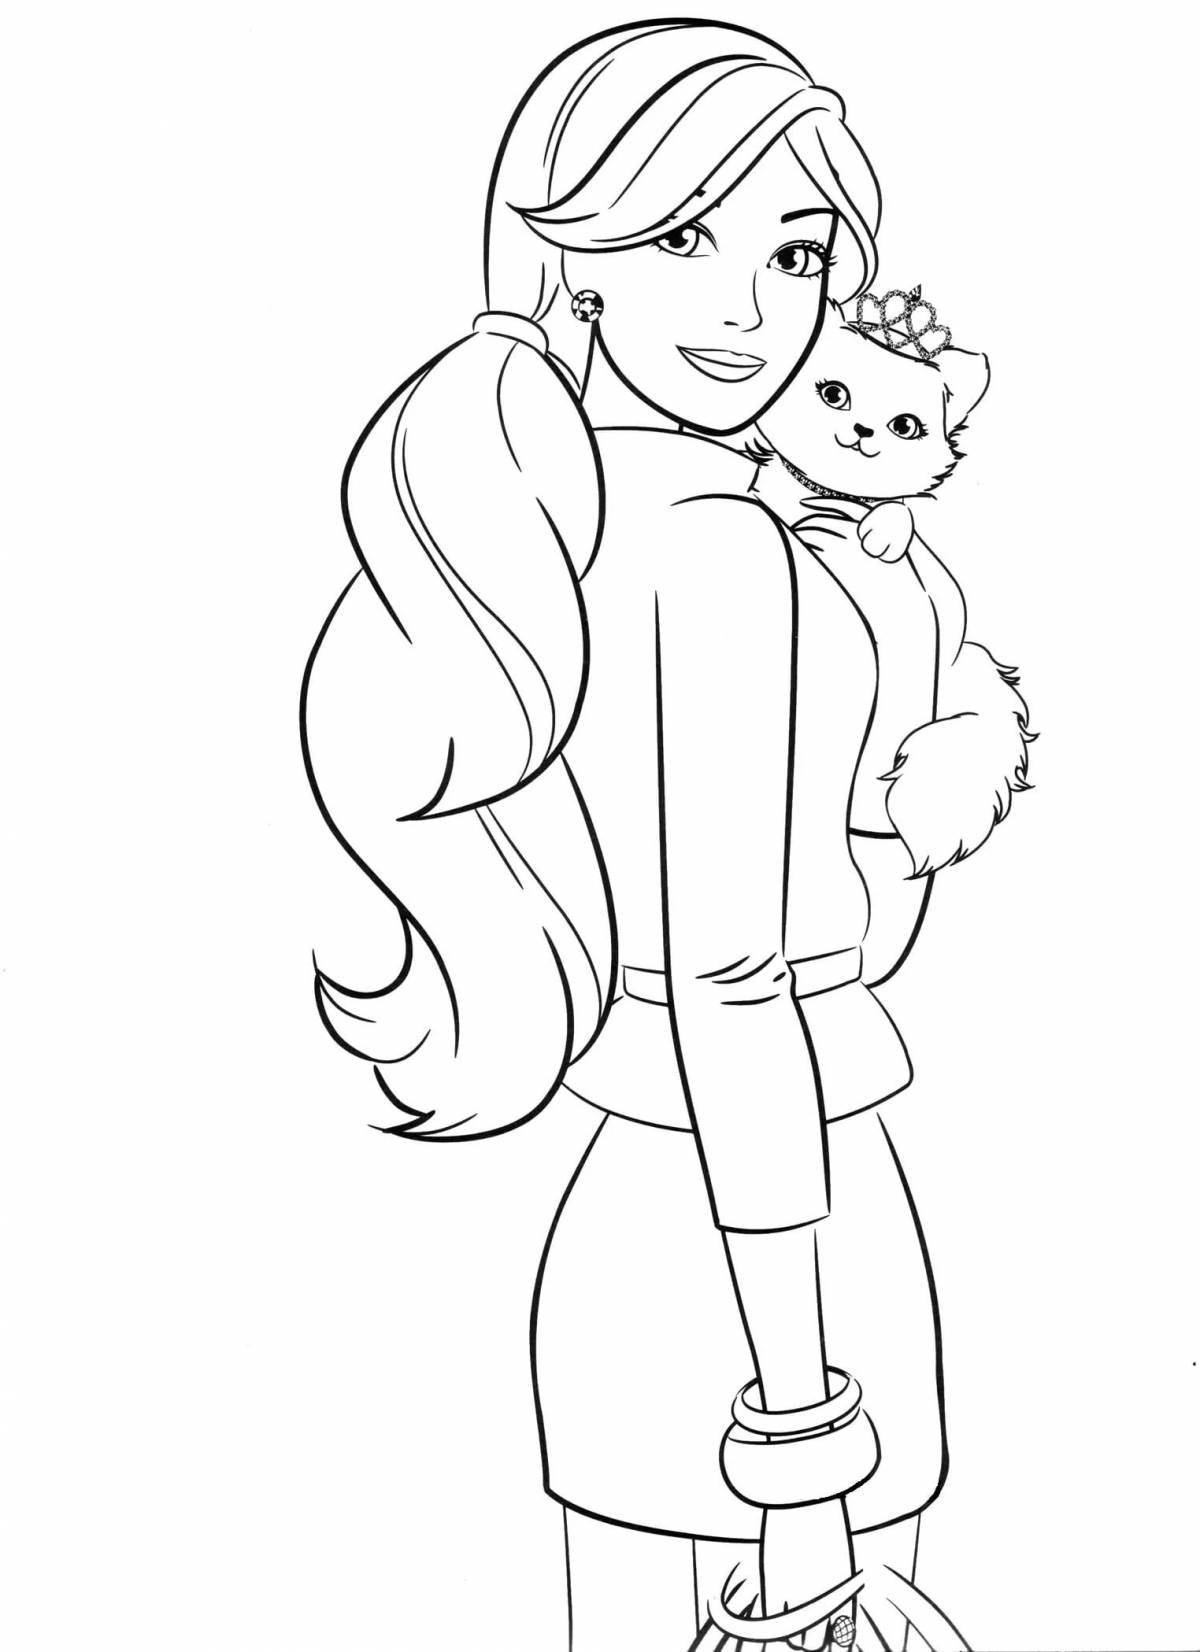 Bright fashion girls coloring pages